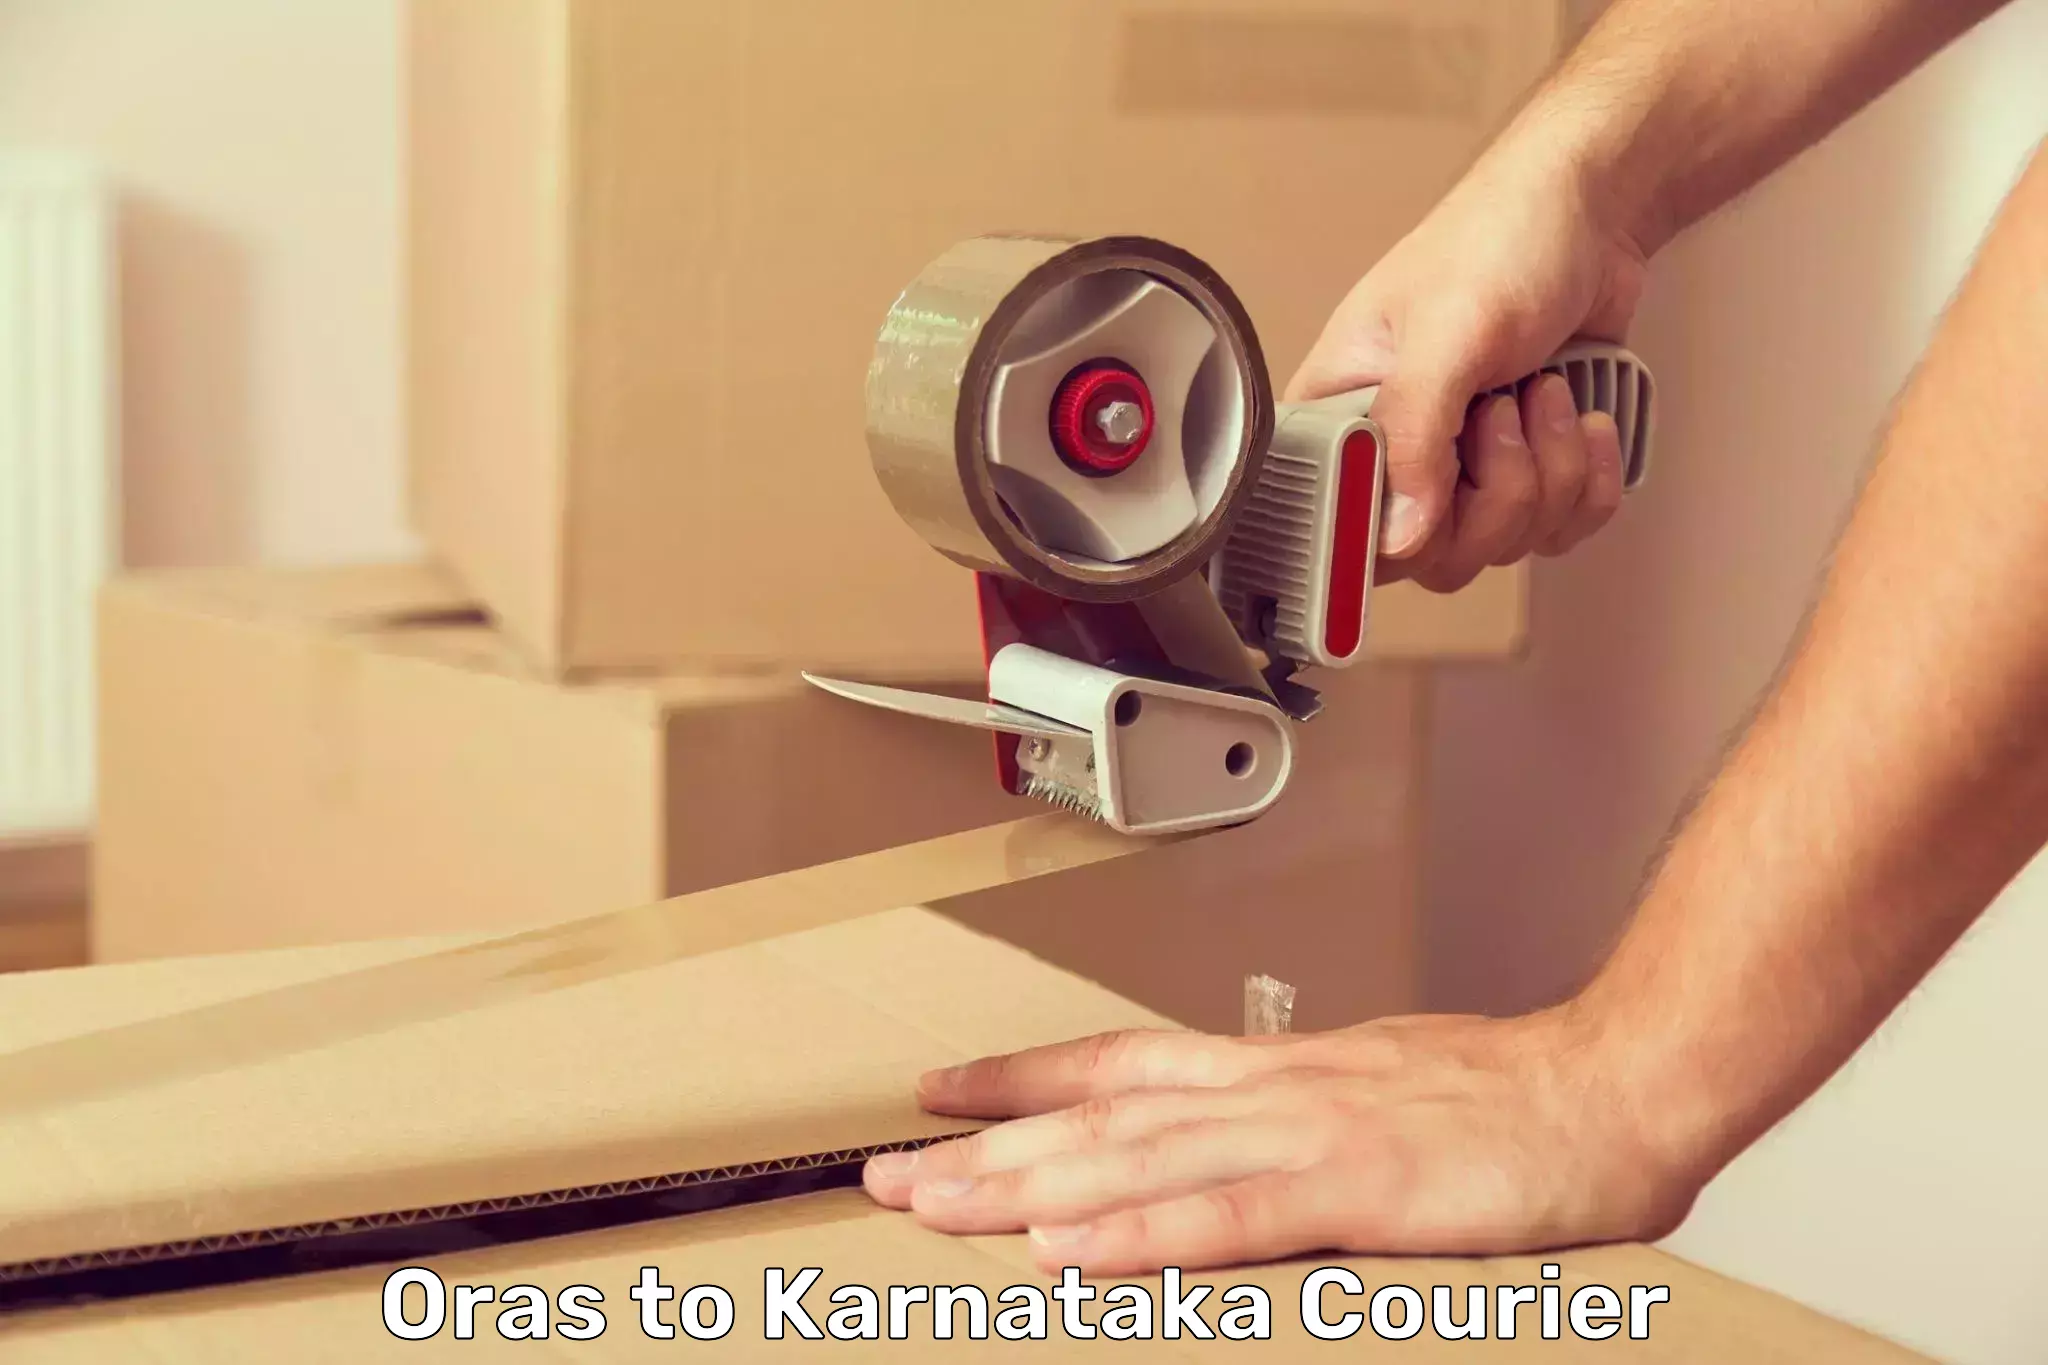 Weekend courier service Oras to Bangalore